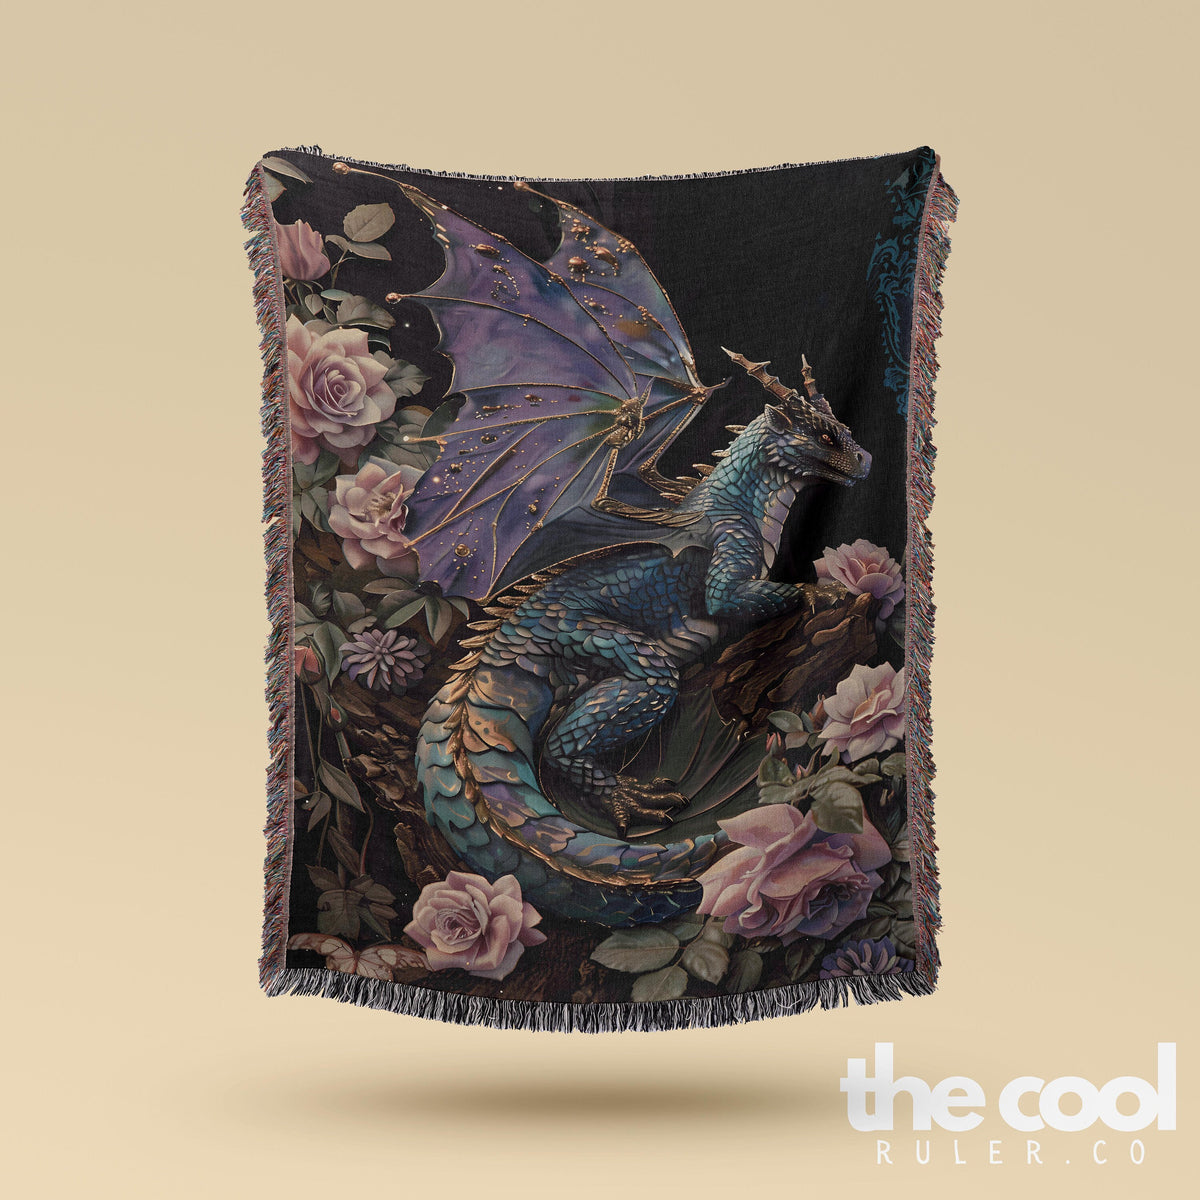 a blue dragon sitting on top of a flower covered blanket